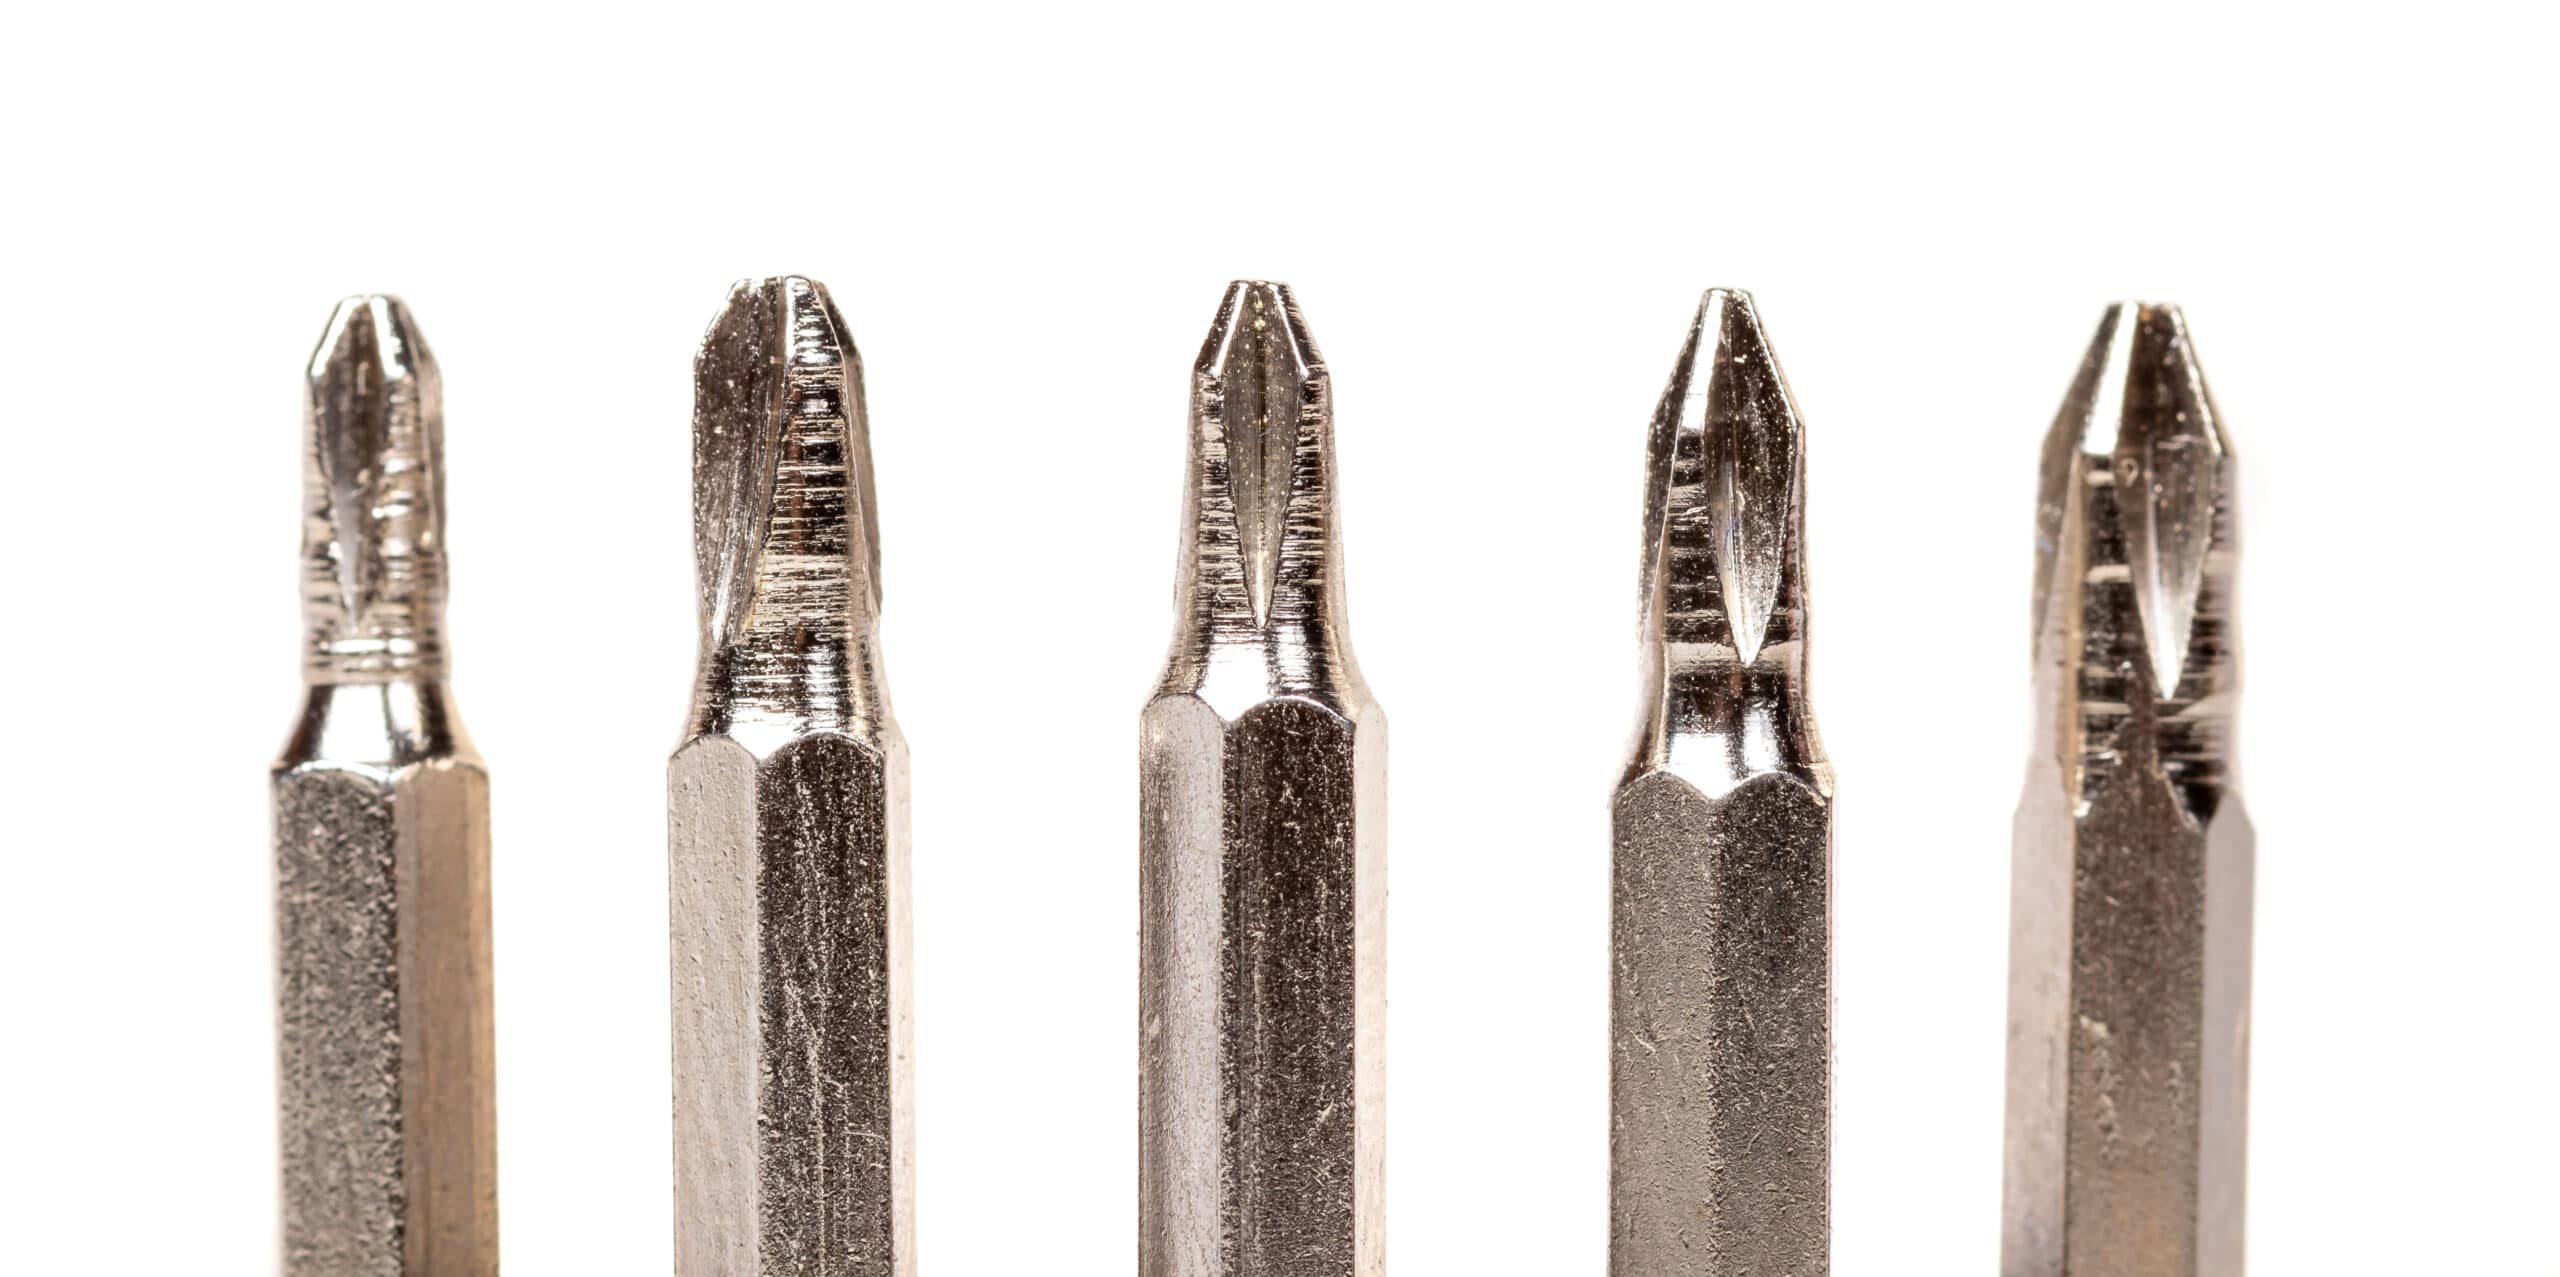 theprecisiontools.com : Do most drill bits fit in all drills?